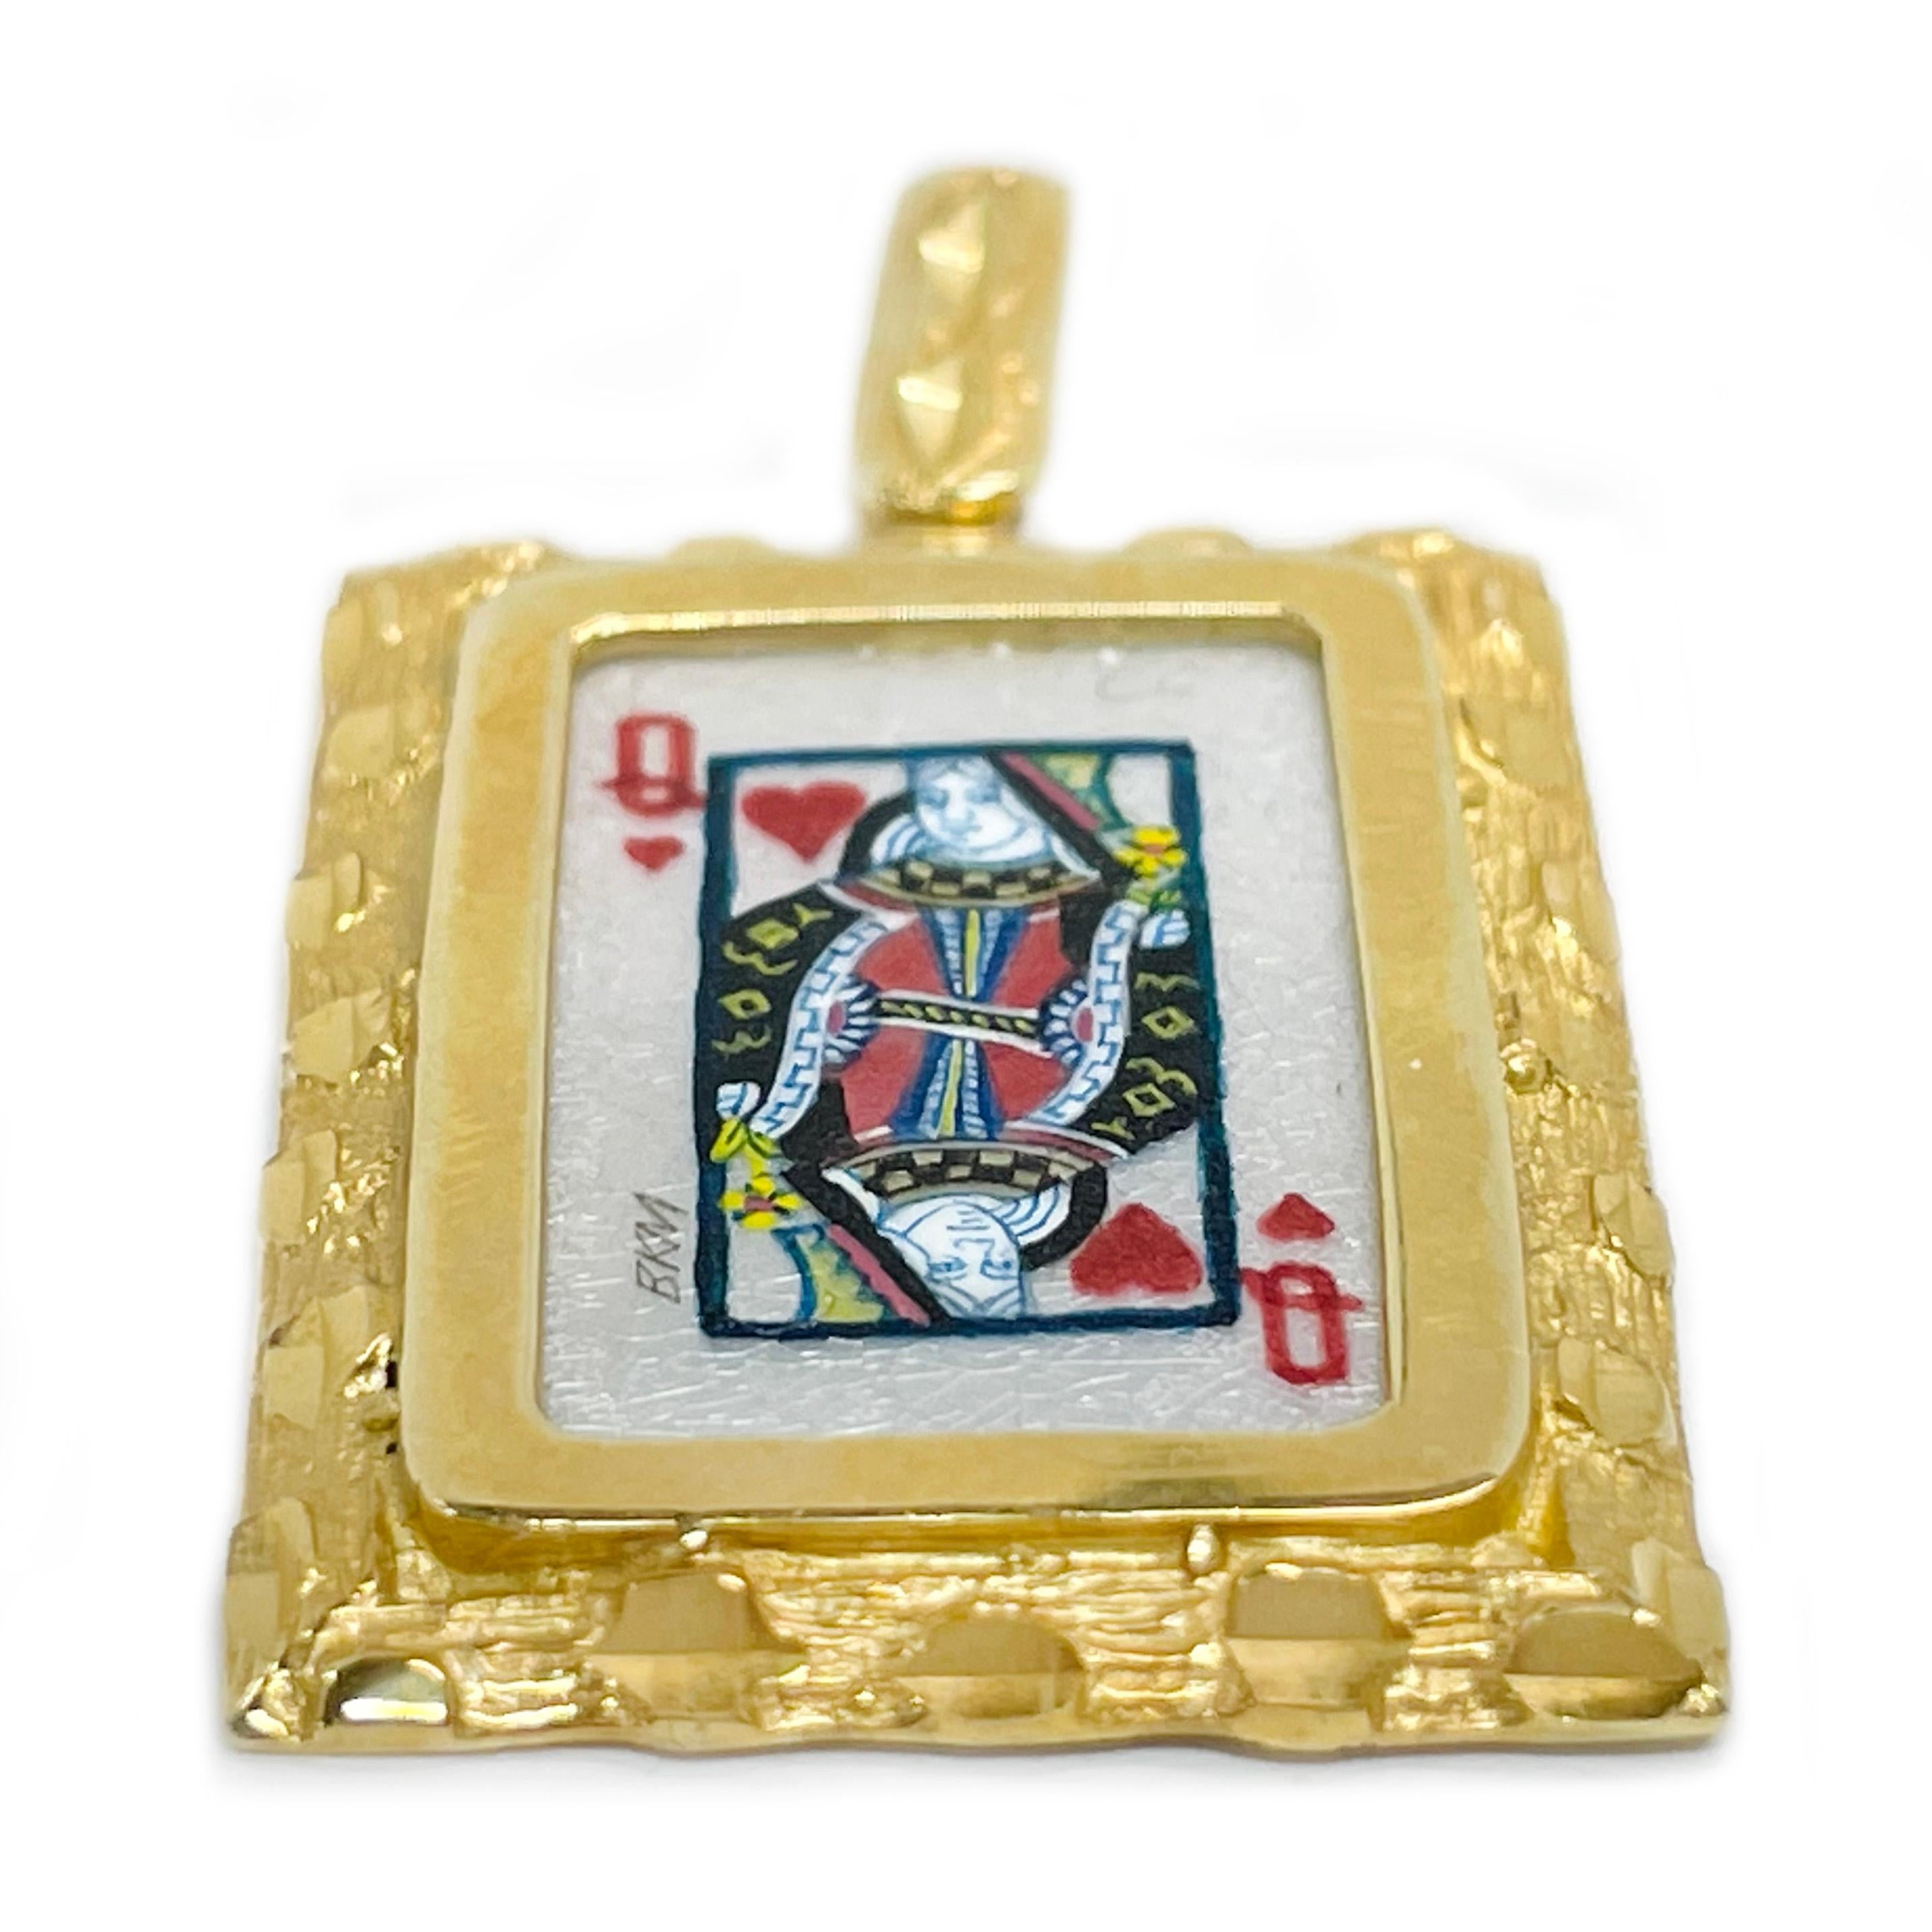 14 Karat Yellow Gold Hand Painted Queen of Hearts Playing Card on Mother of Pearl Pendant. The miniature painting is set in a 14 karat gold rectangular frame with diamond-cut details. The painting is signed by the master artist, BKM Brian M. and